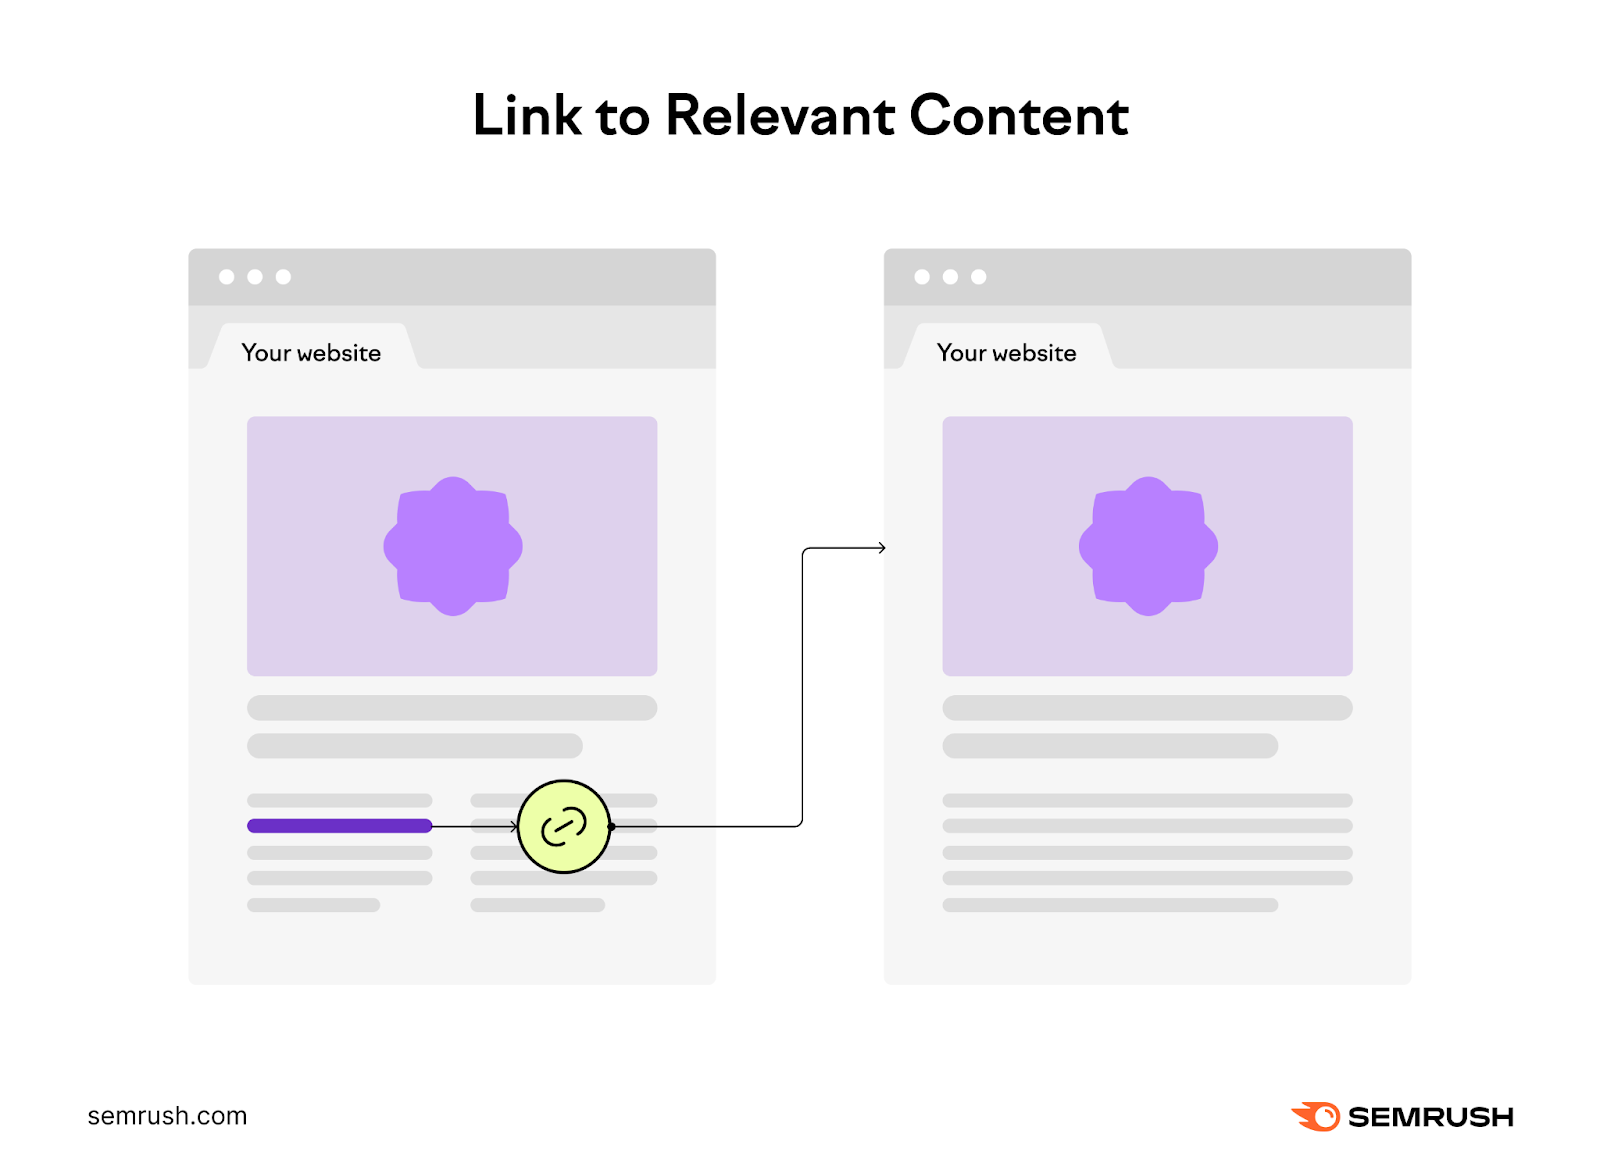 A visual showing internal link to a relevant content